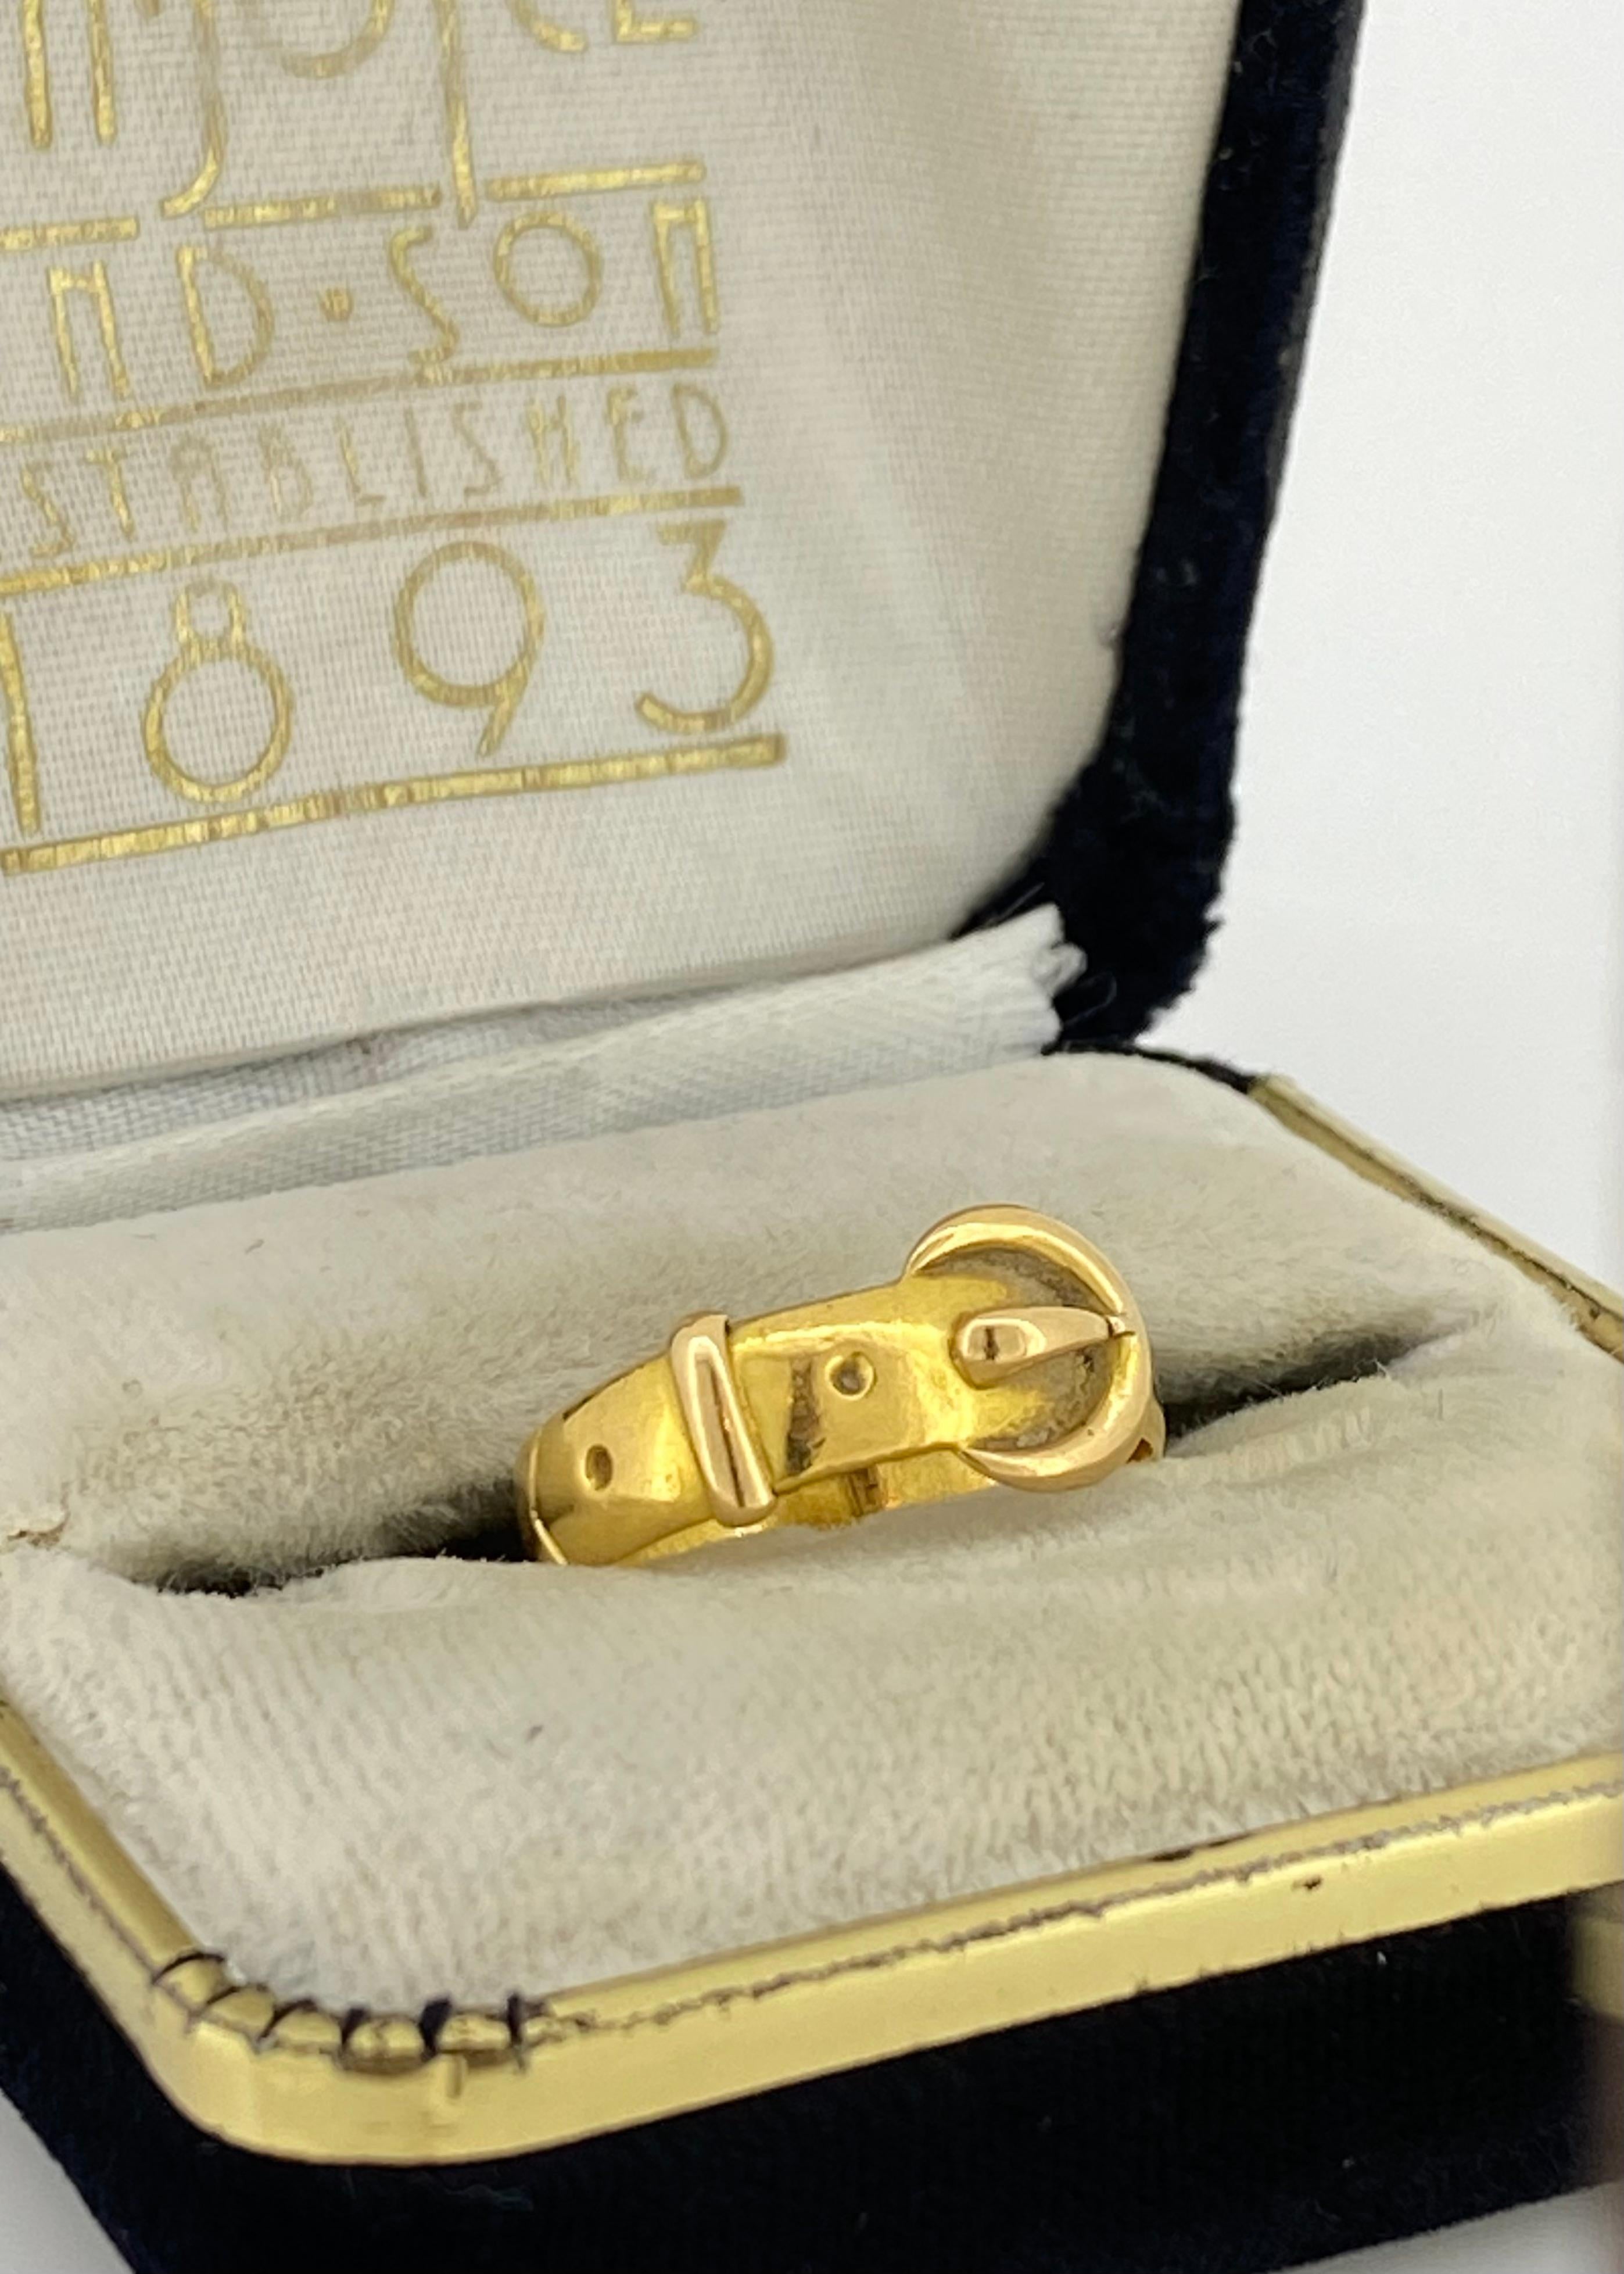 Crafted from 22K yellow gold, 
the ring features an intricate belt / buckle shape 
(incredibly detailed throughout), 
with a band width of 10mm

The piece is from late Victorian era, 
yet it's in beautiful condition  

Symbolising the sentimental,